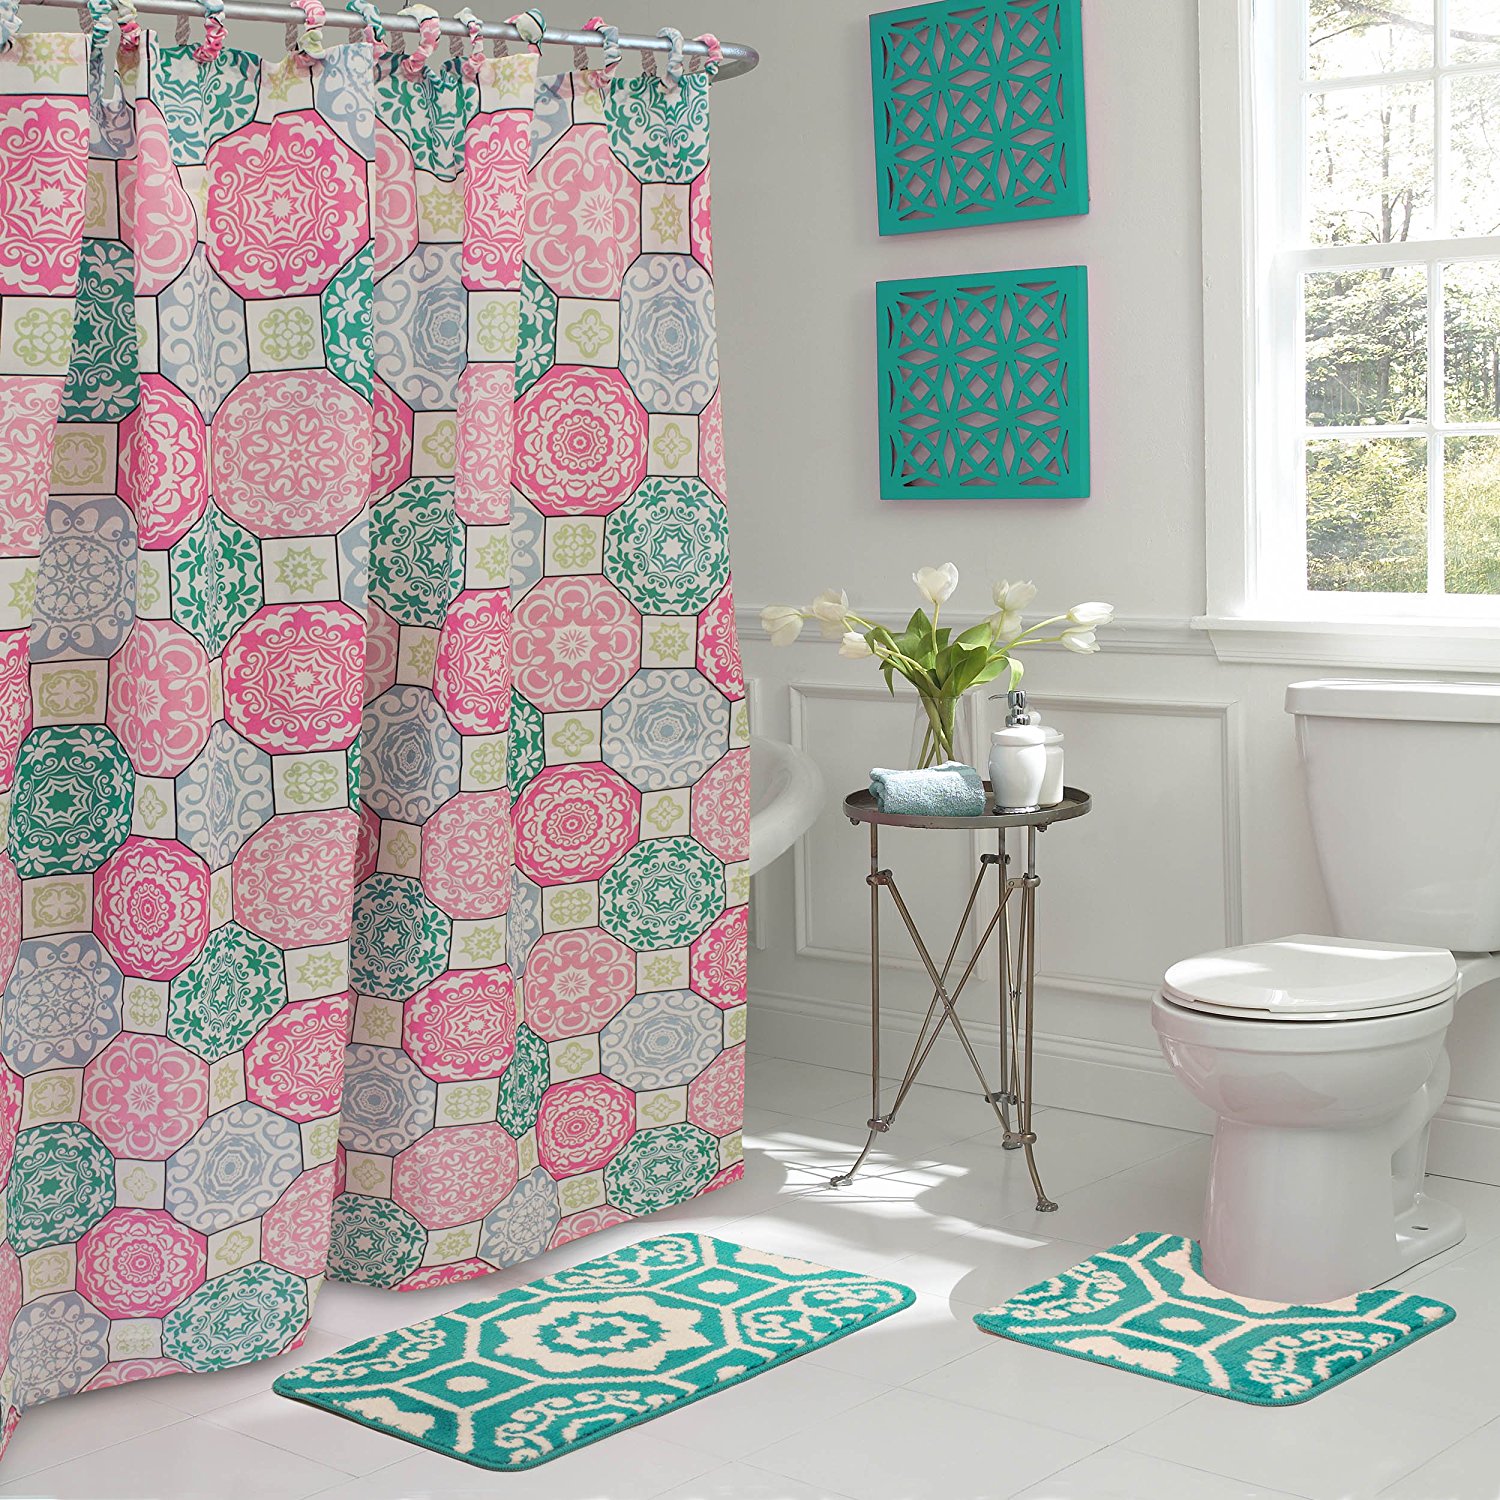 Bathroom Sets with Shower Curtain and Rugs Selection ...